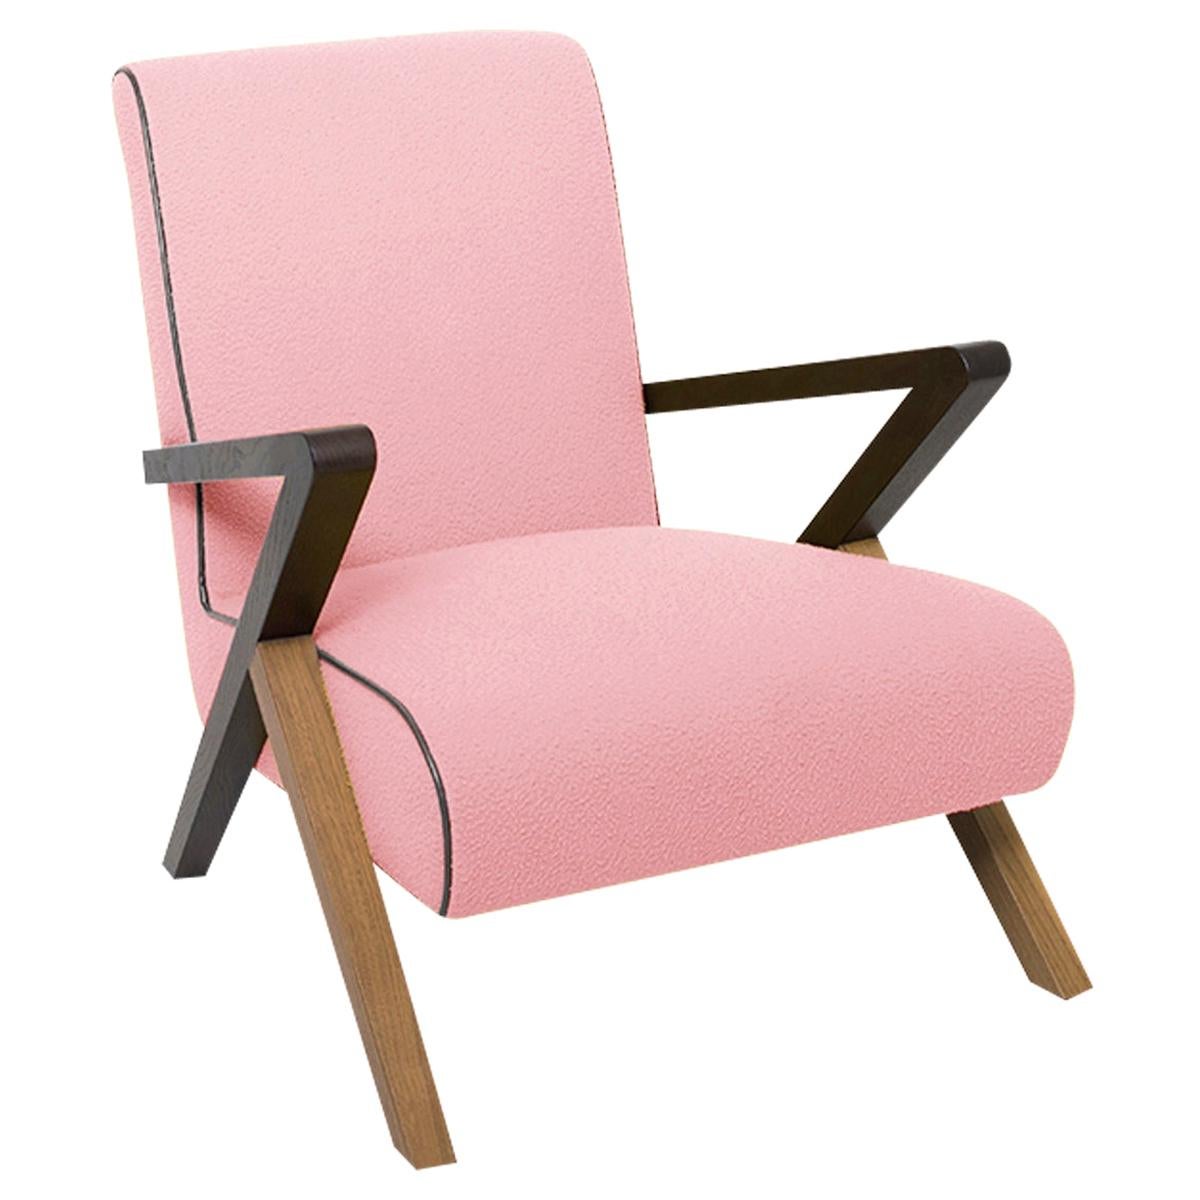 Fiftypop, Pink Armchair Inspired to the 1950s, Used for Exhibition For Sale